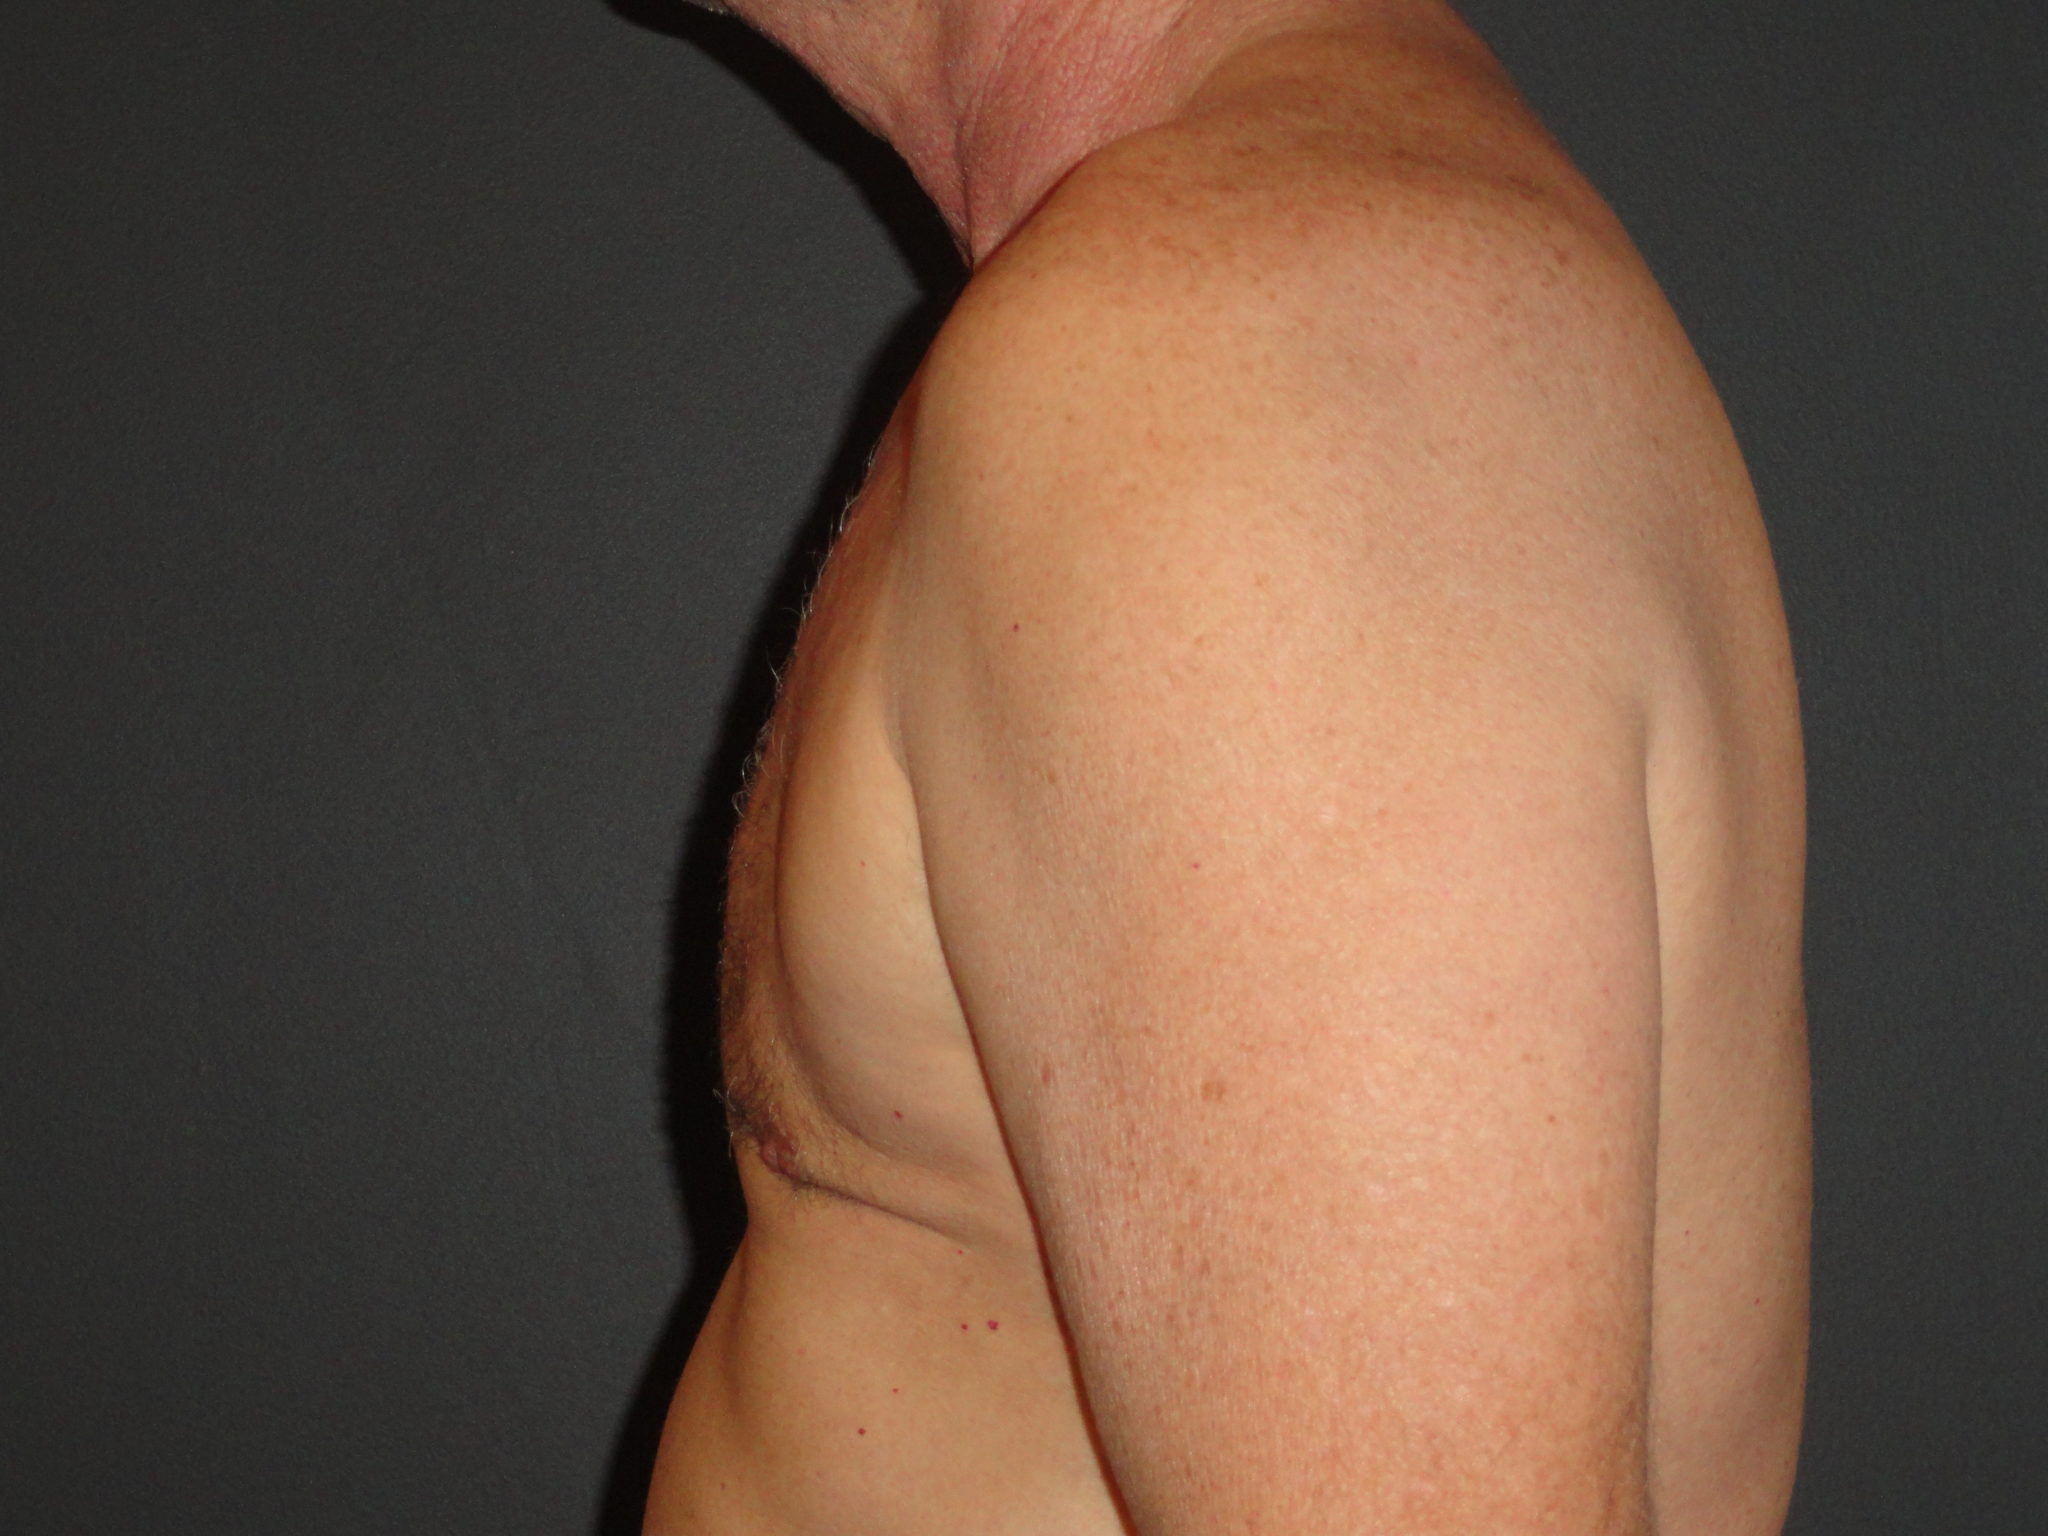 Gynecomastia Surgery Before and After Photos